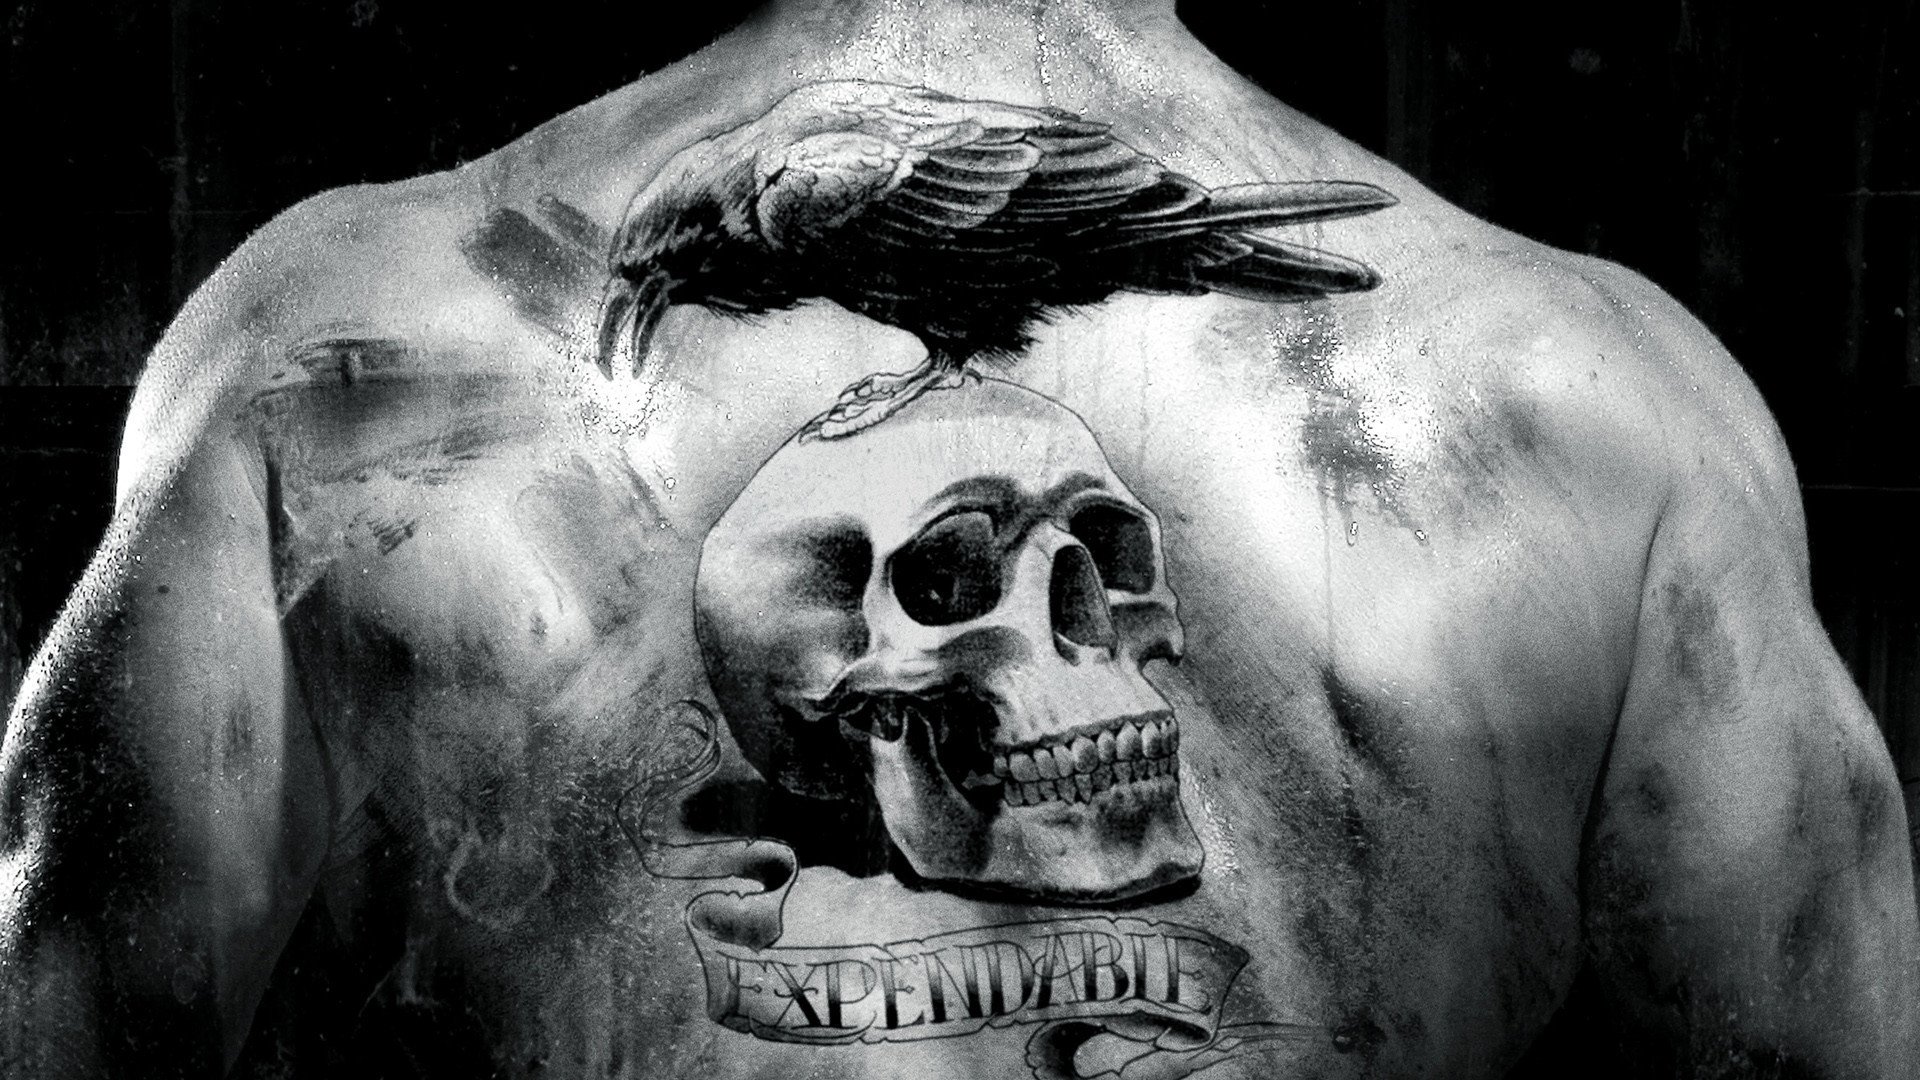 expendable, Tattoo Wallpaper